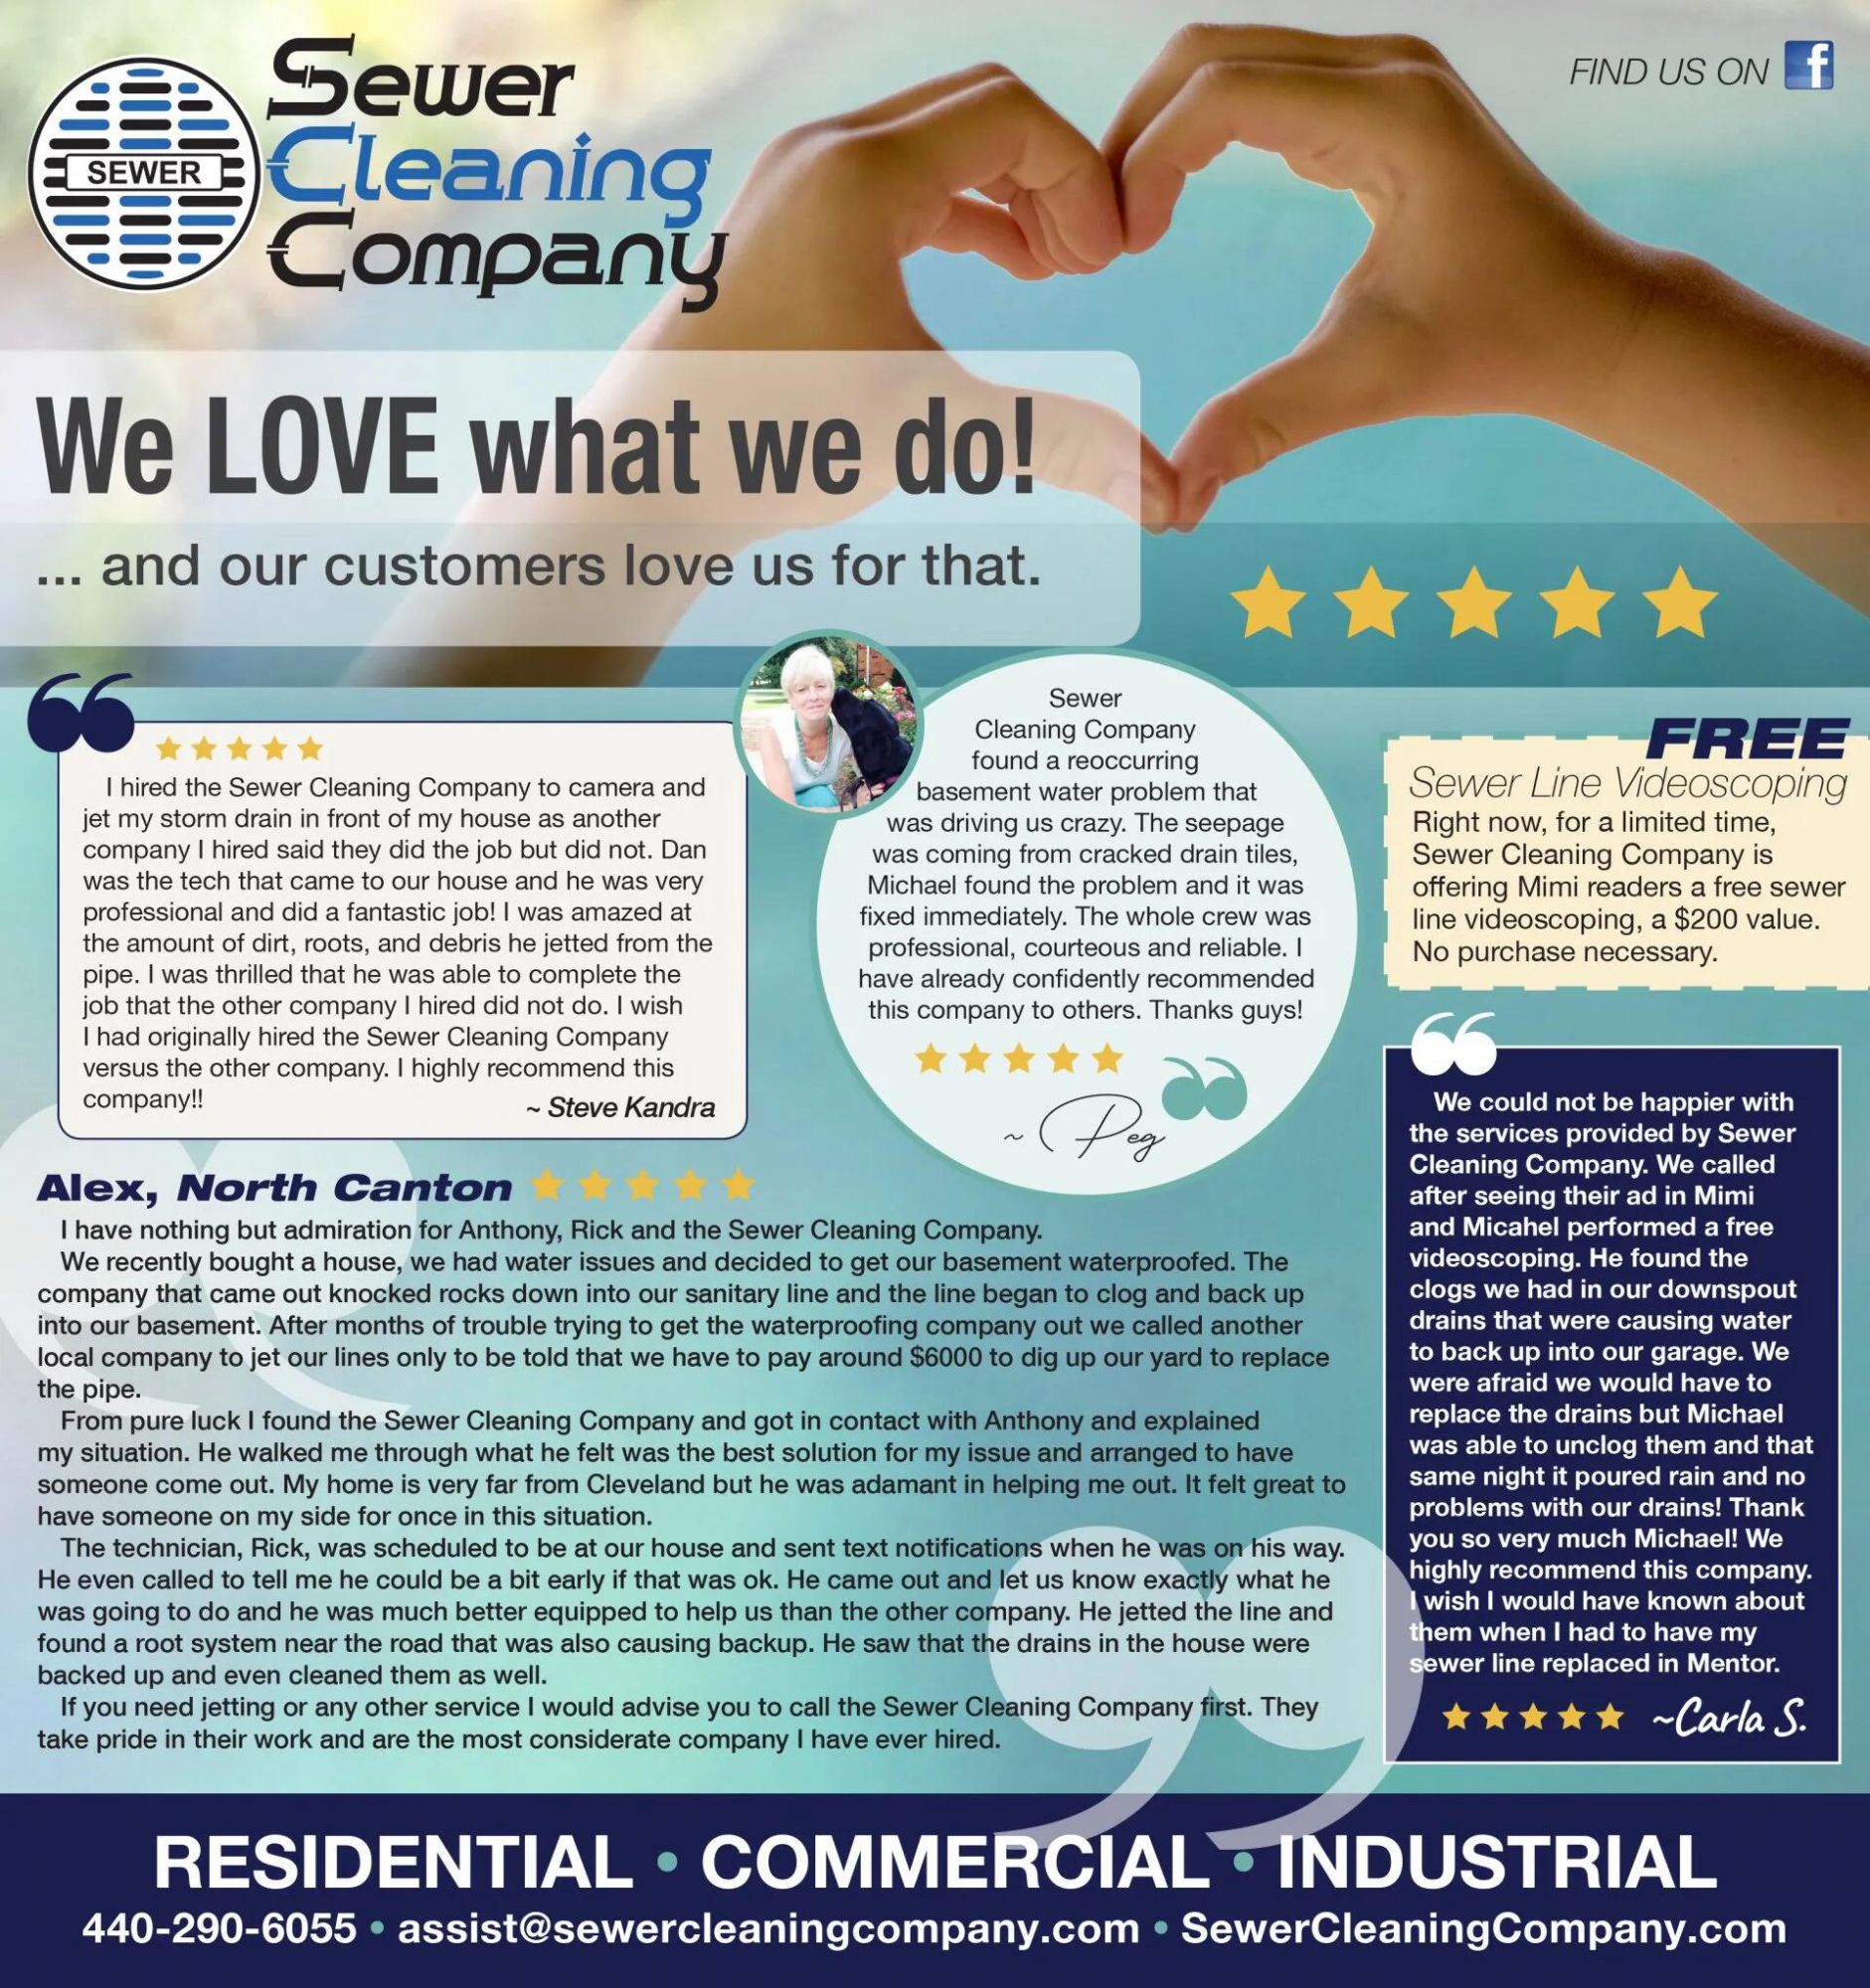 Sewer Cleaning Company "We Love What We Do!" infographic